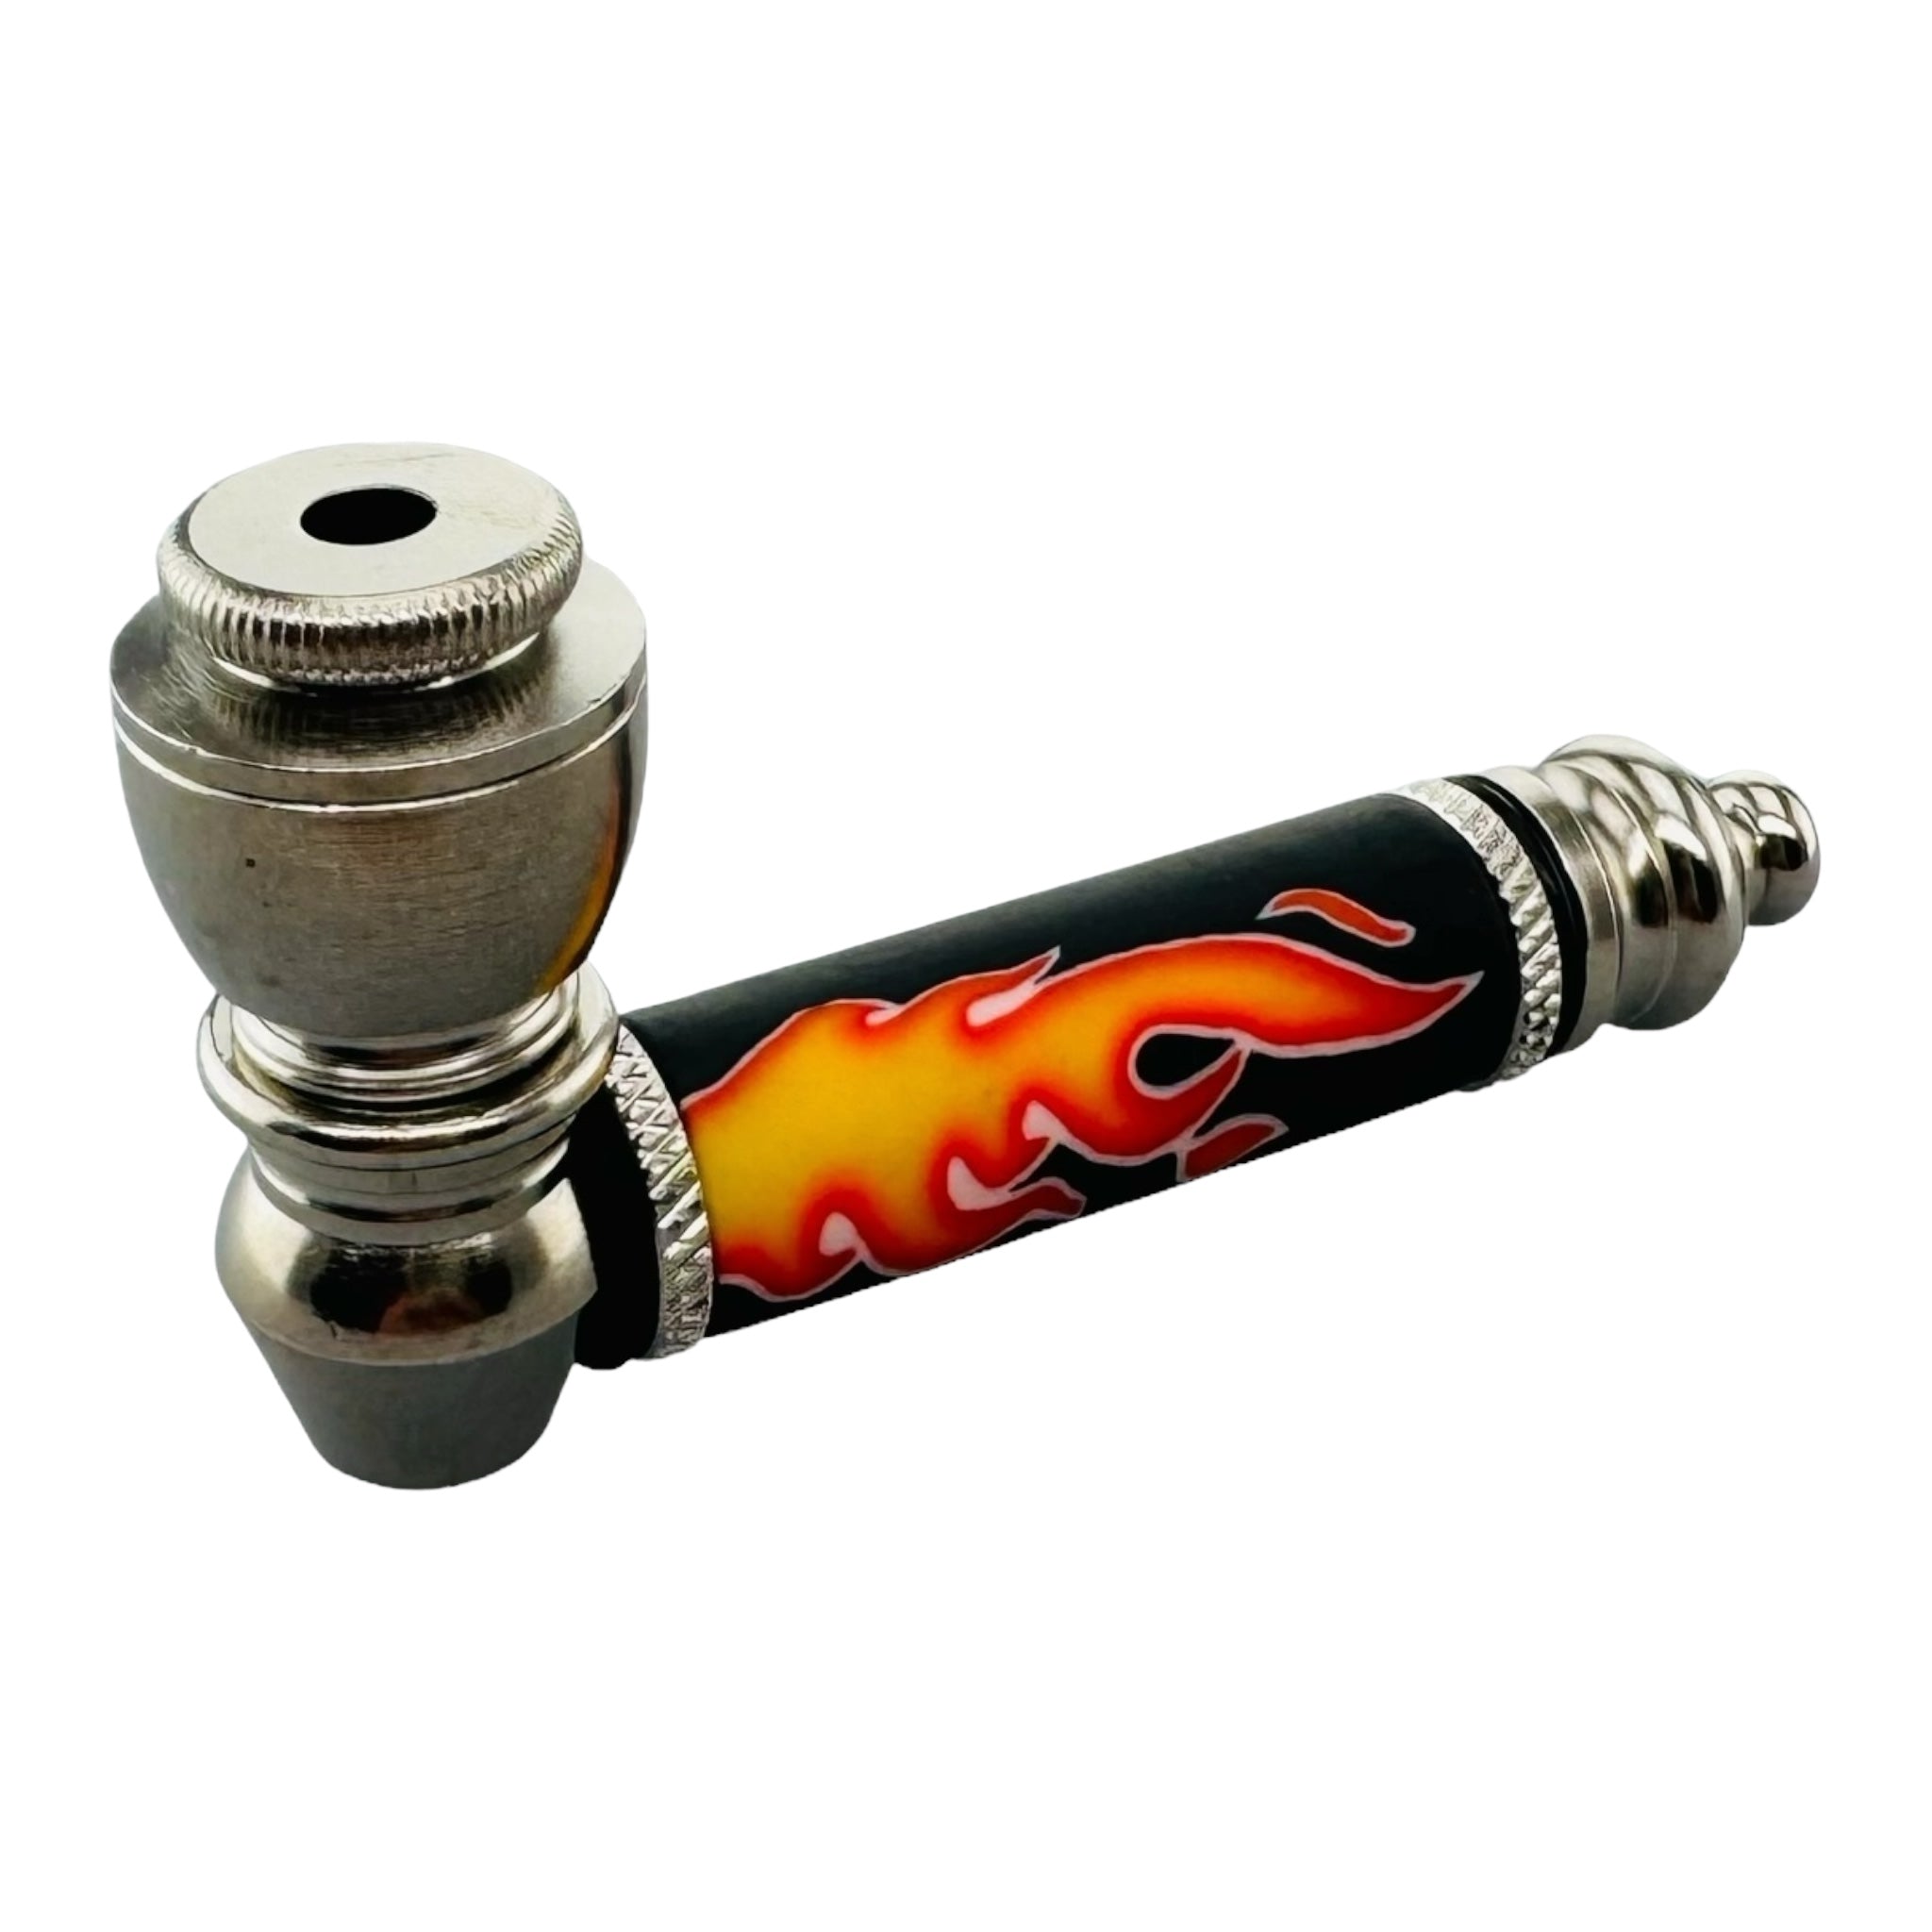 Metal Hand Pipes - Silver Chrome Hand Pipe for weed or tobacco With Flames